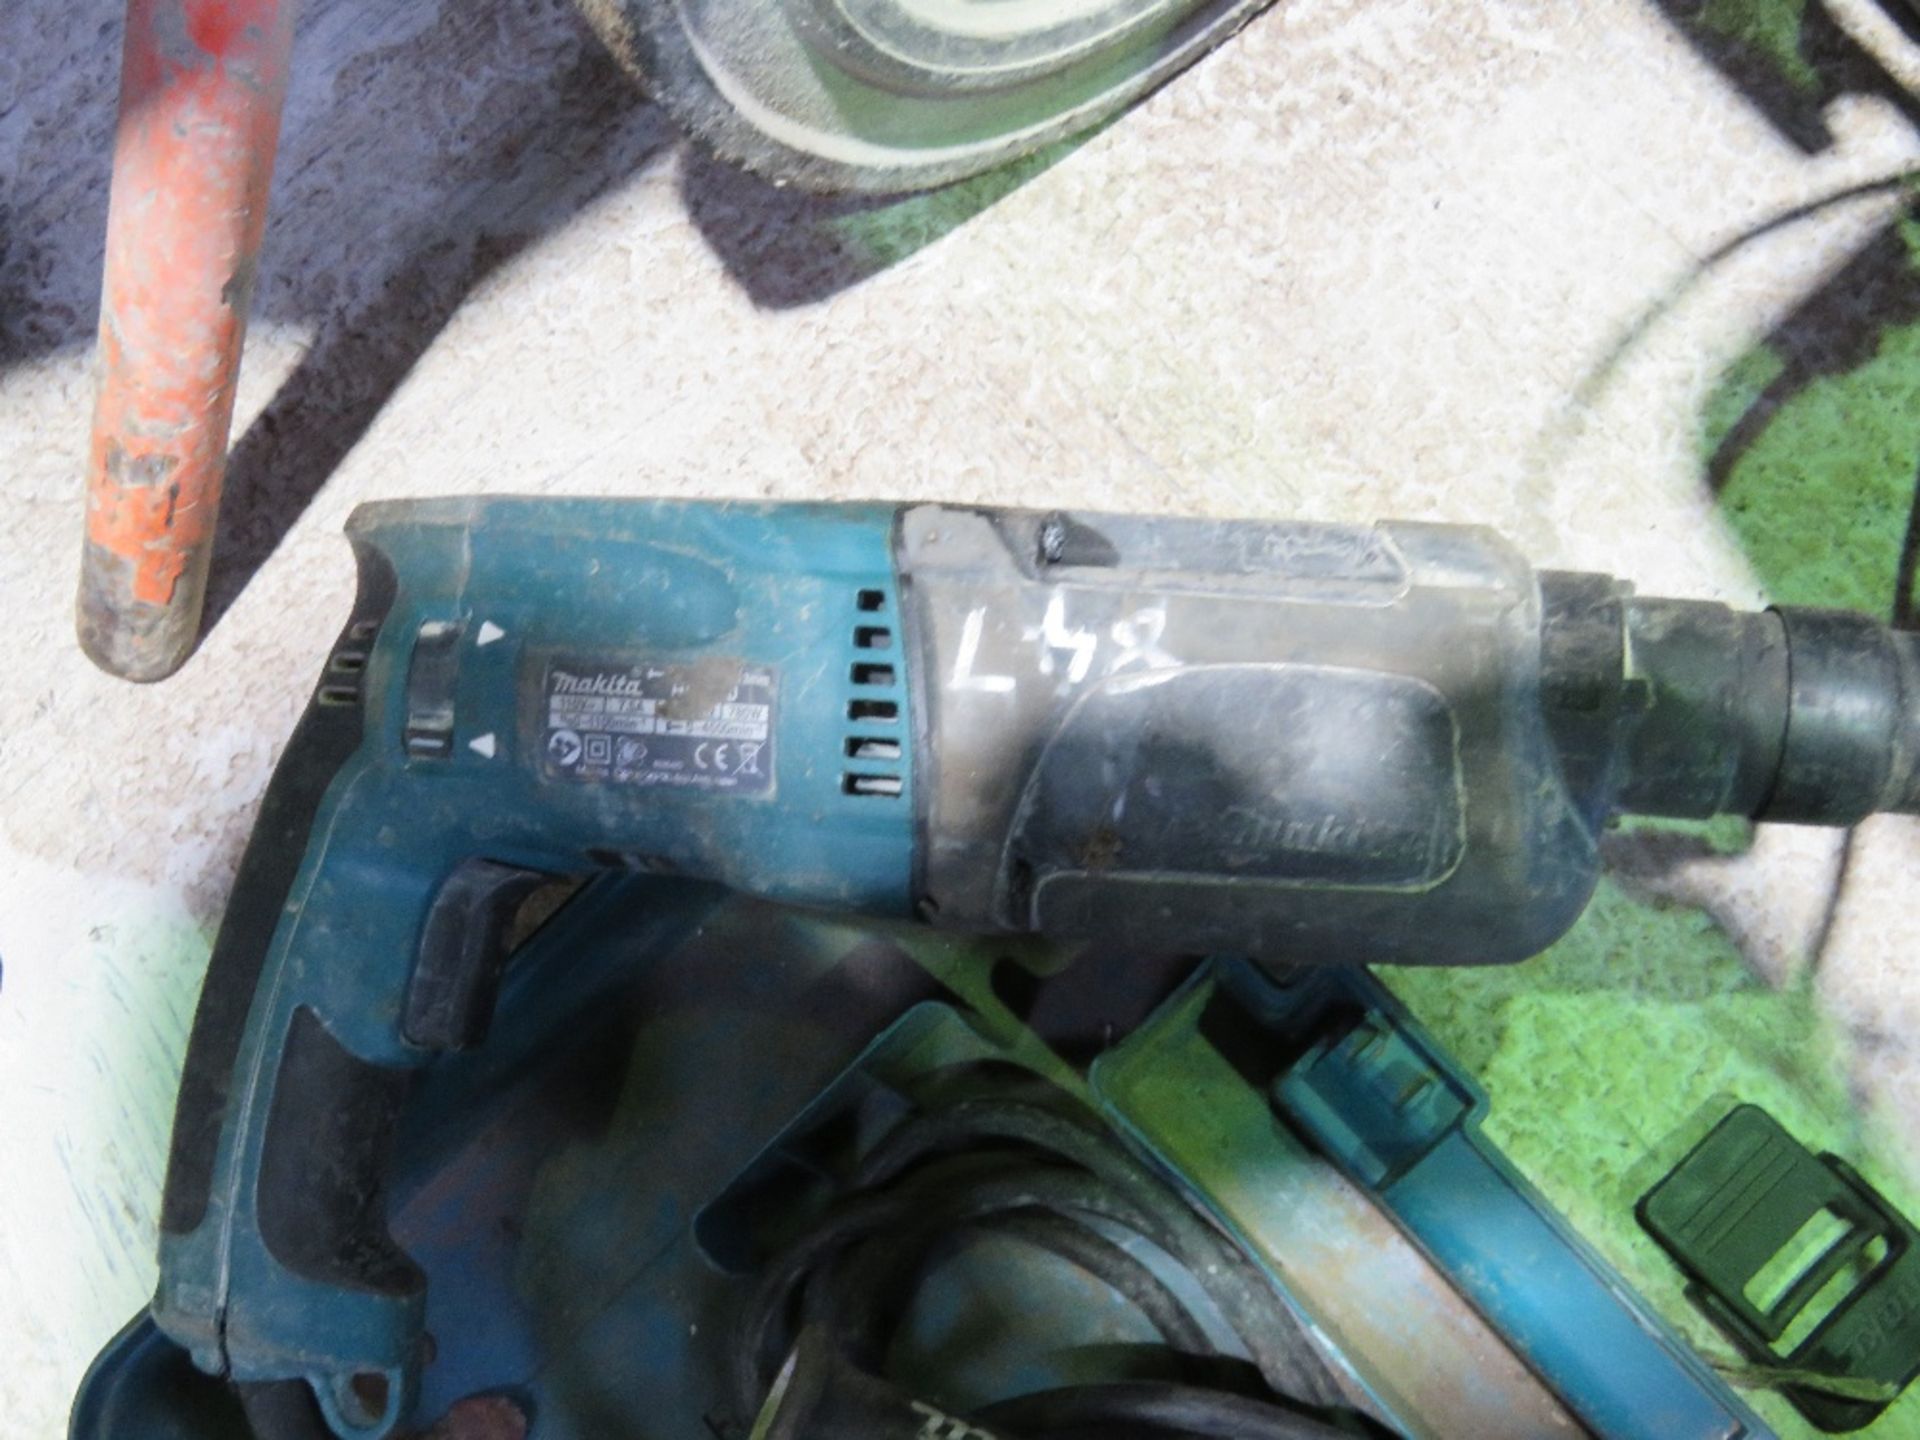 3 X MAKITA POWER TOOLS: 2 NO DRILLS PLUS A JIGSAW.. THIS LOT IS SOLD UNDER THE AUCTIONEERS MARGIN - Bild 5 aus 5